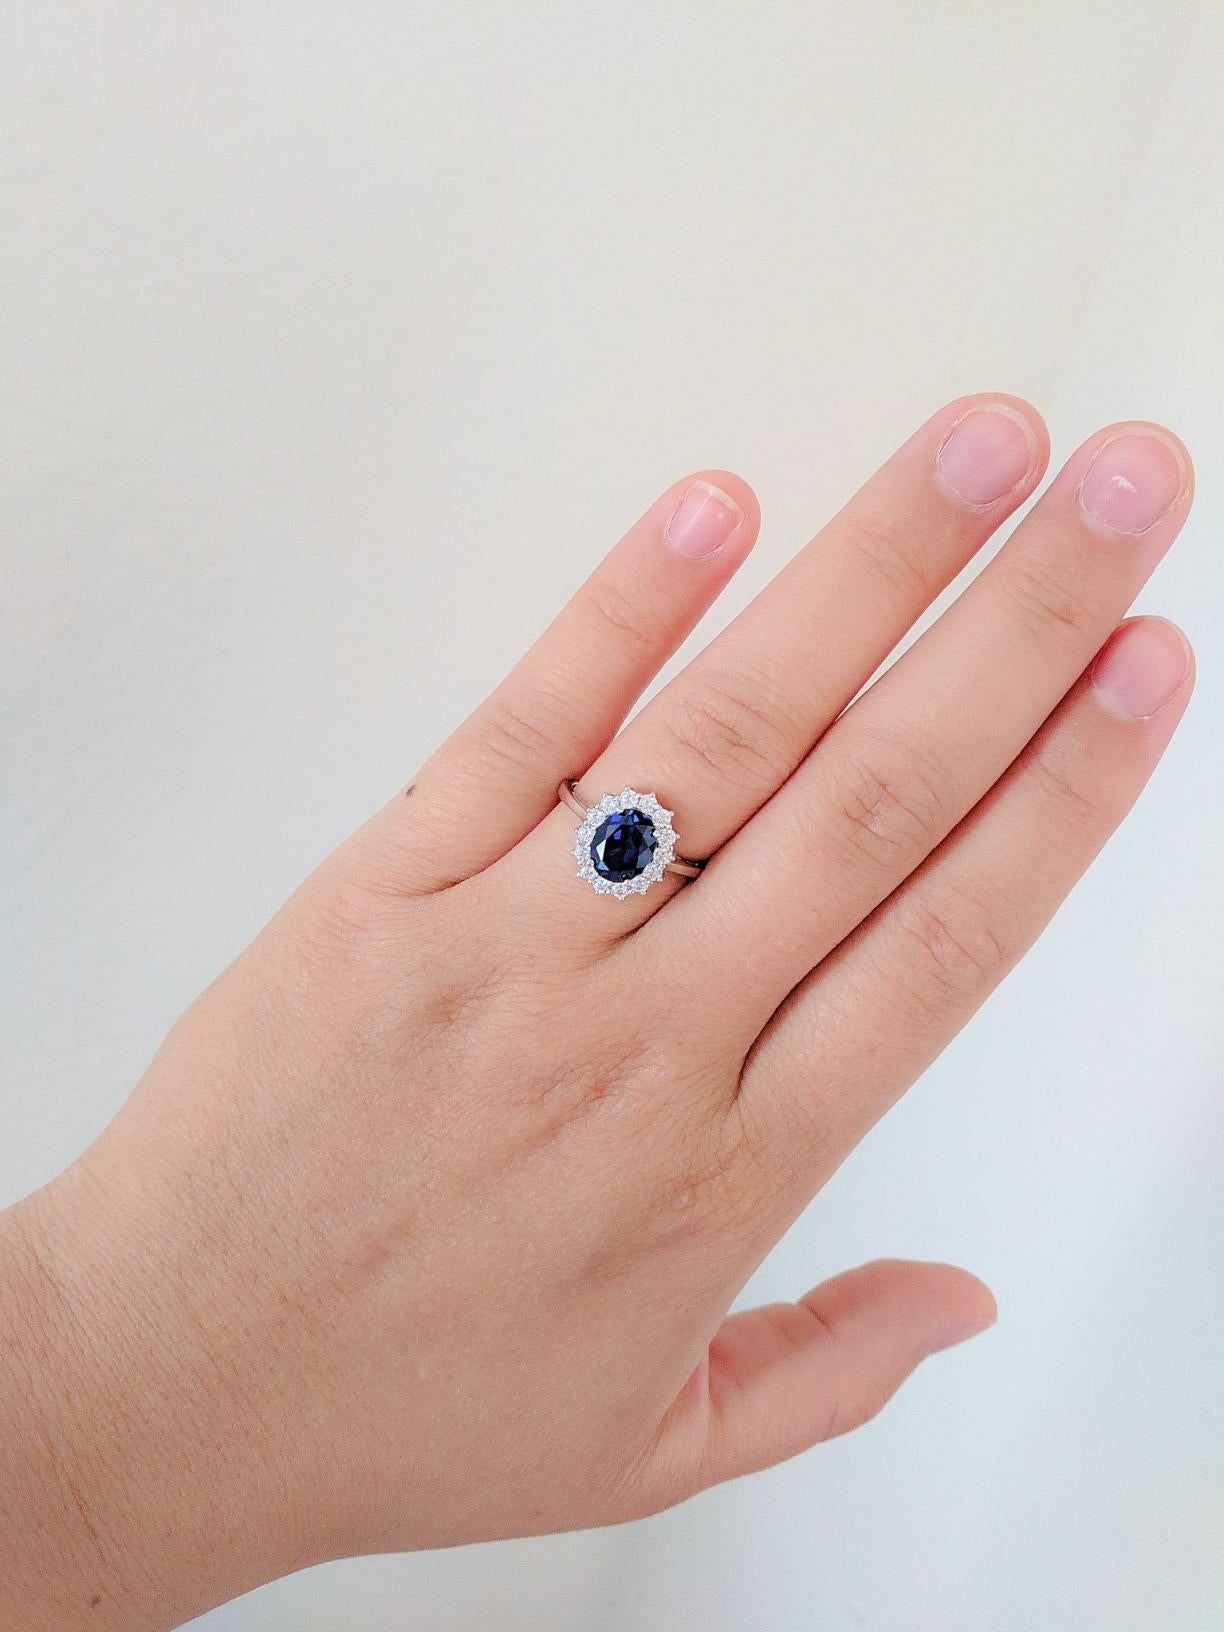 a reviewer wearing the ring with a thin band, middle sapphire stone that is surrounded by clear gems